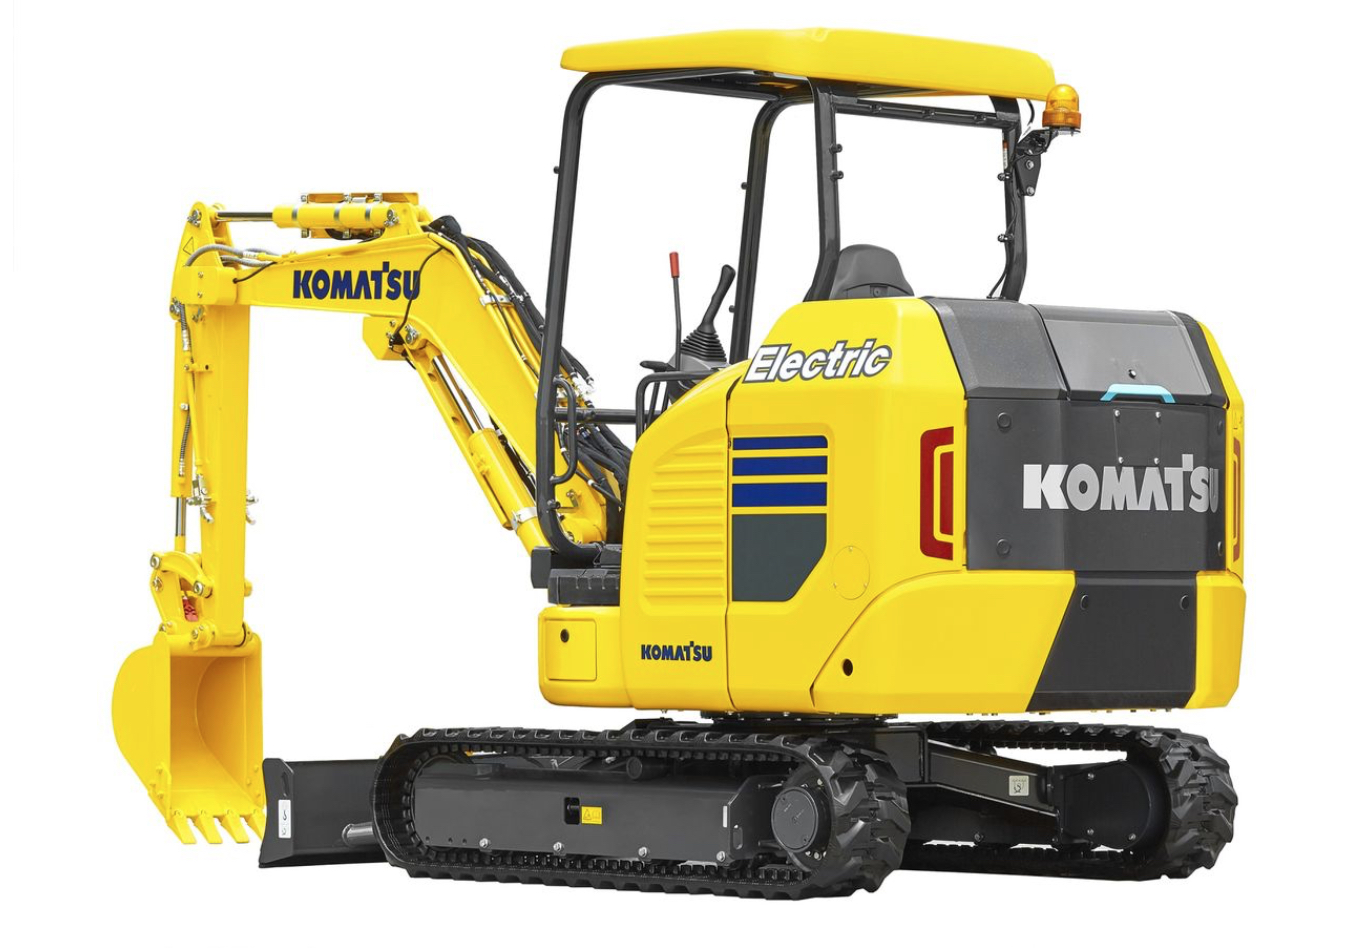 KOMATSU GEARS UP FOR BUSY 2020 MODEL ARRIVALS - McHale Plant Sales